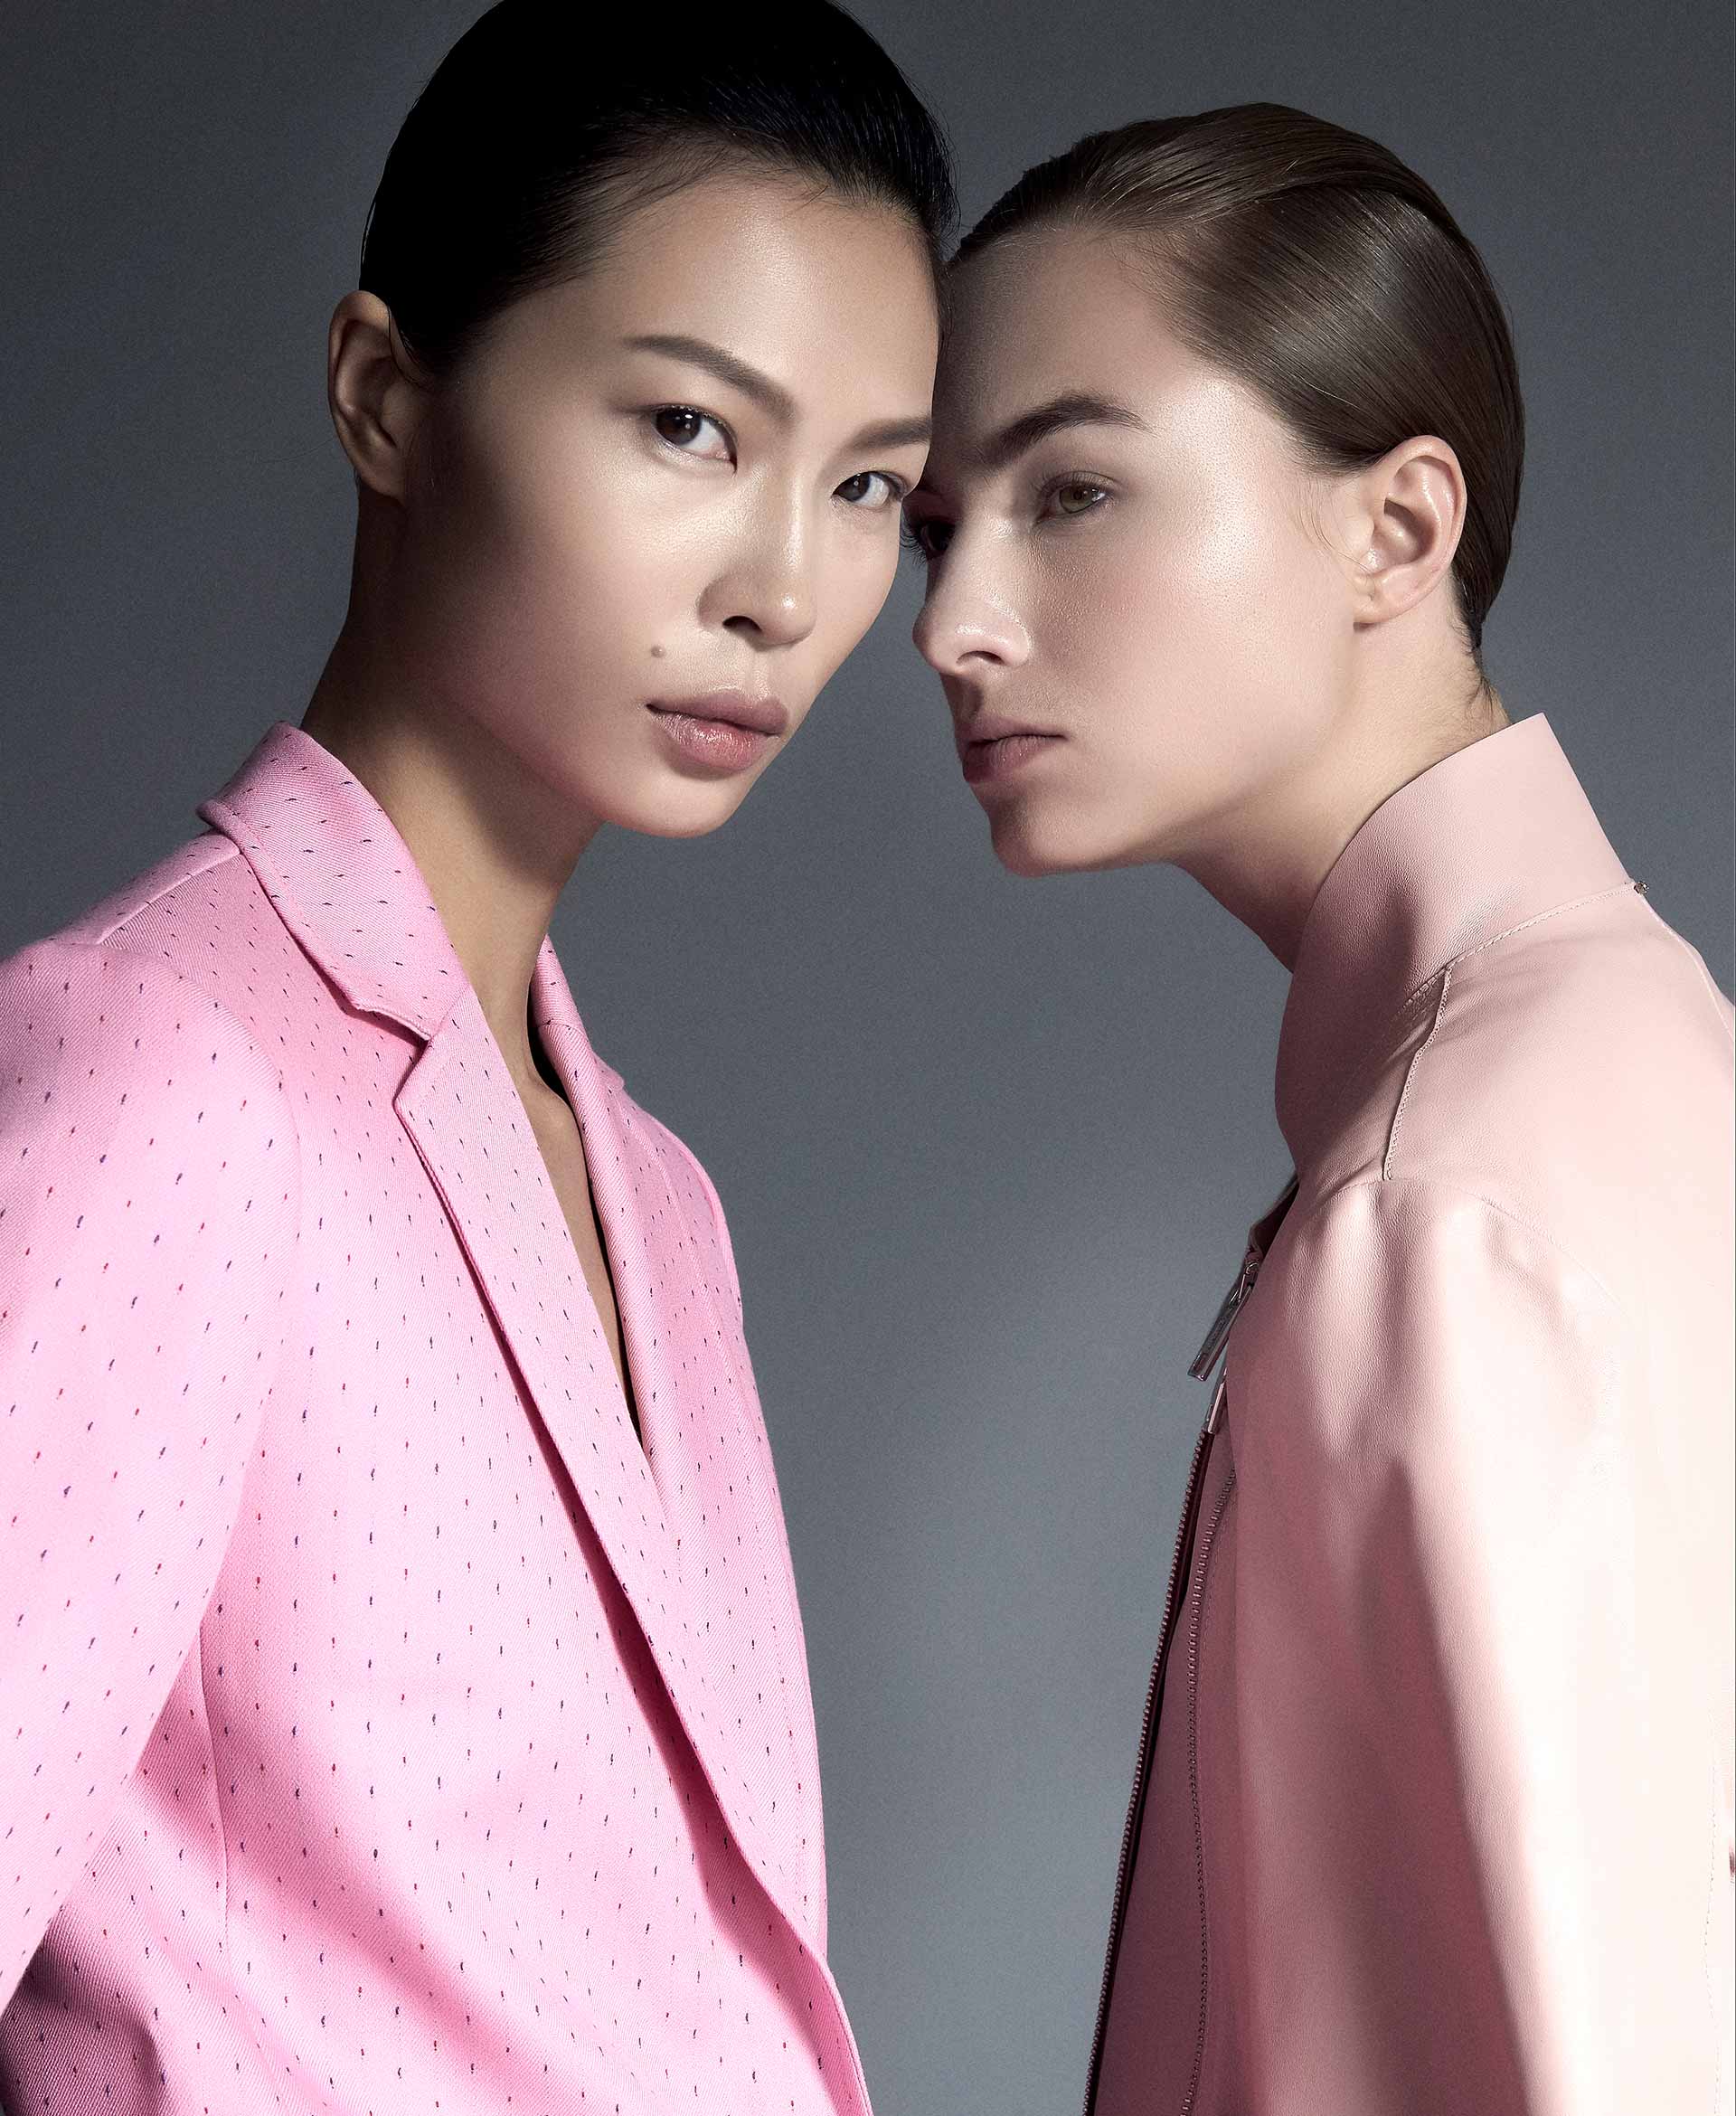 Two models go matching in pastel pink jackets from Sandro and Sportmax